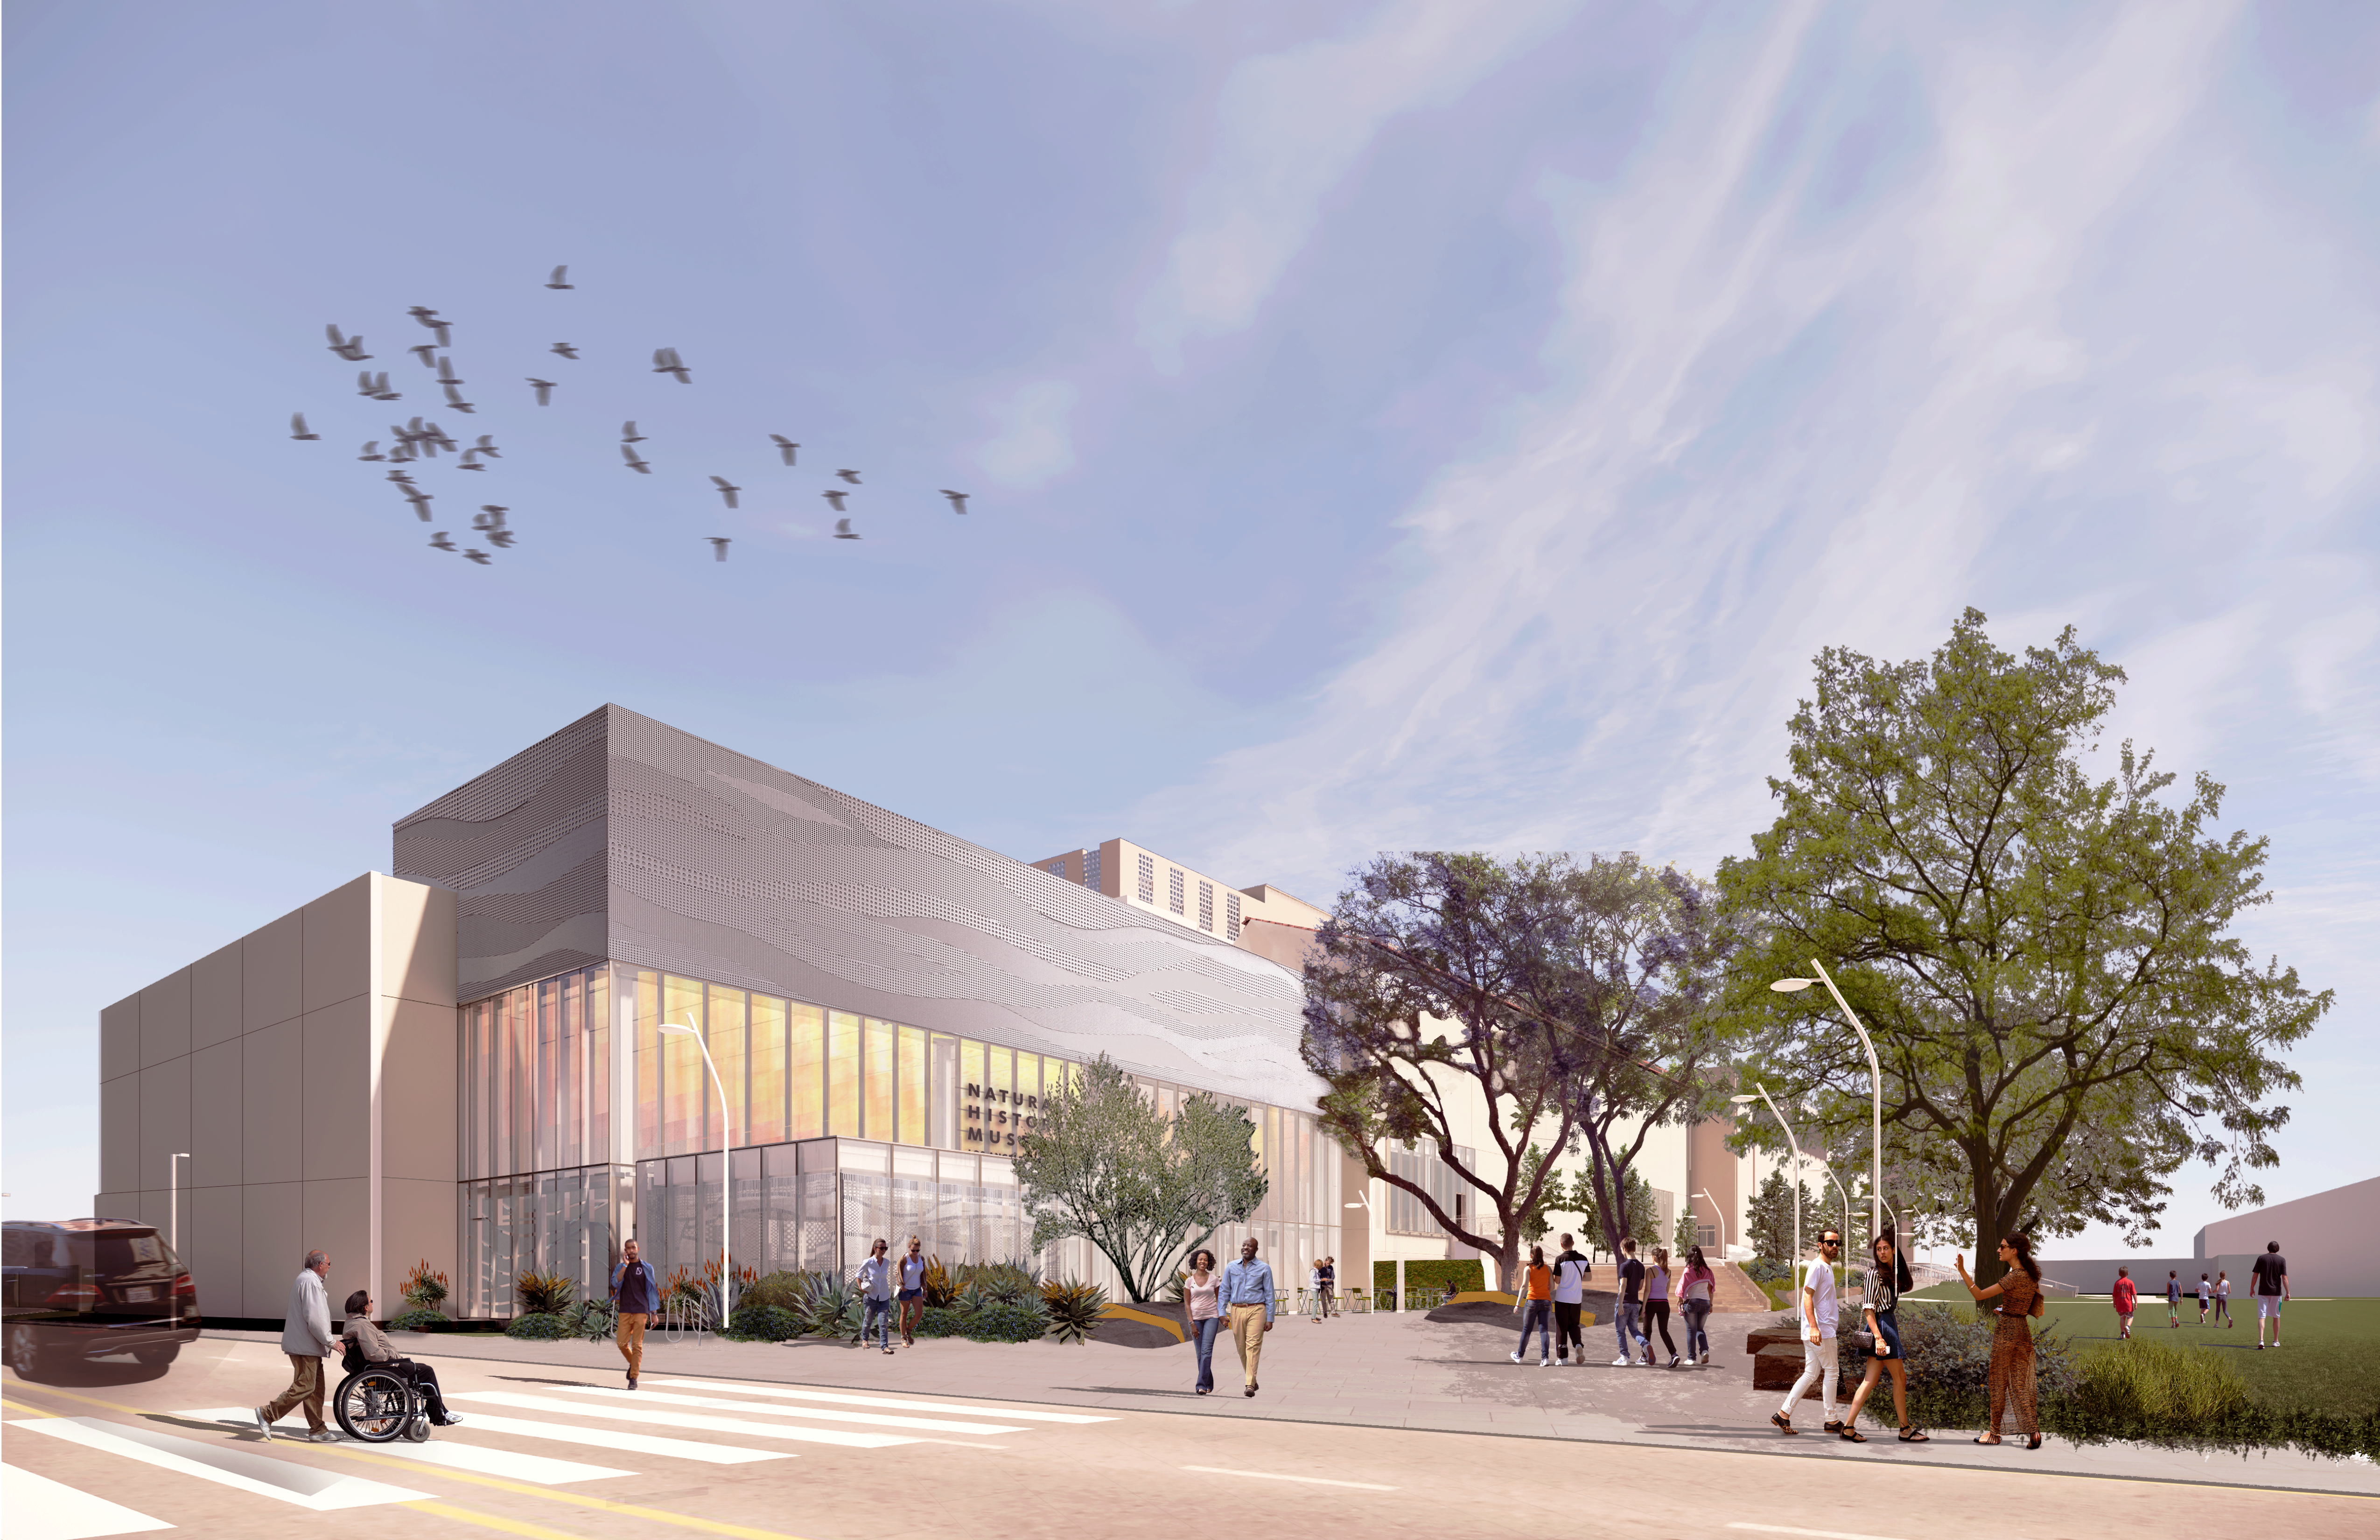 New wing of Natural History Museums of Los Angeles to be a destination and portal